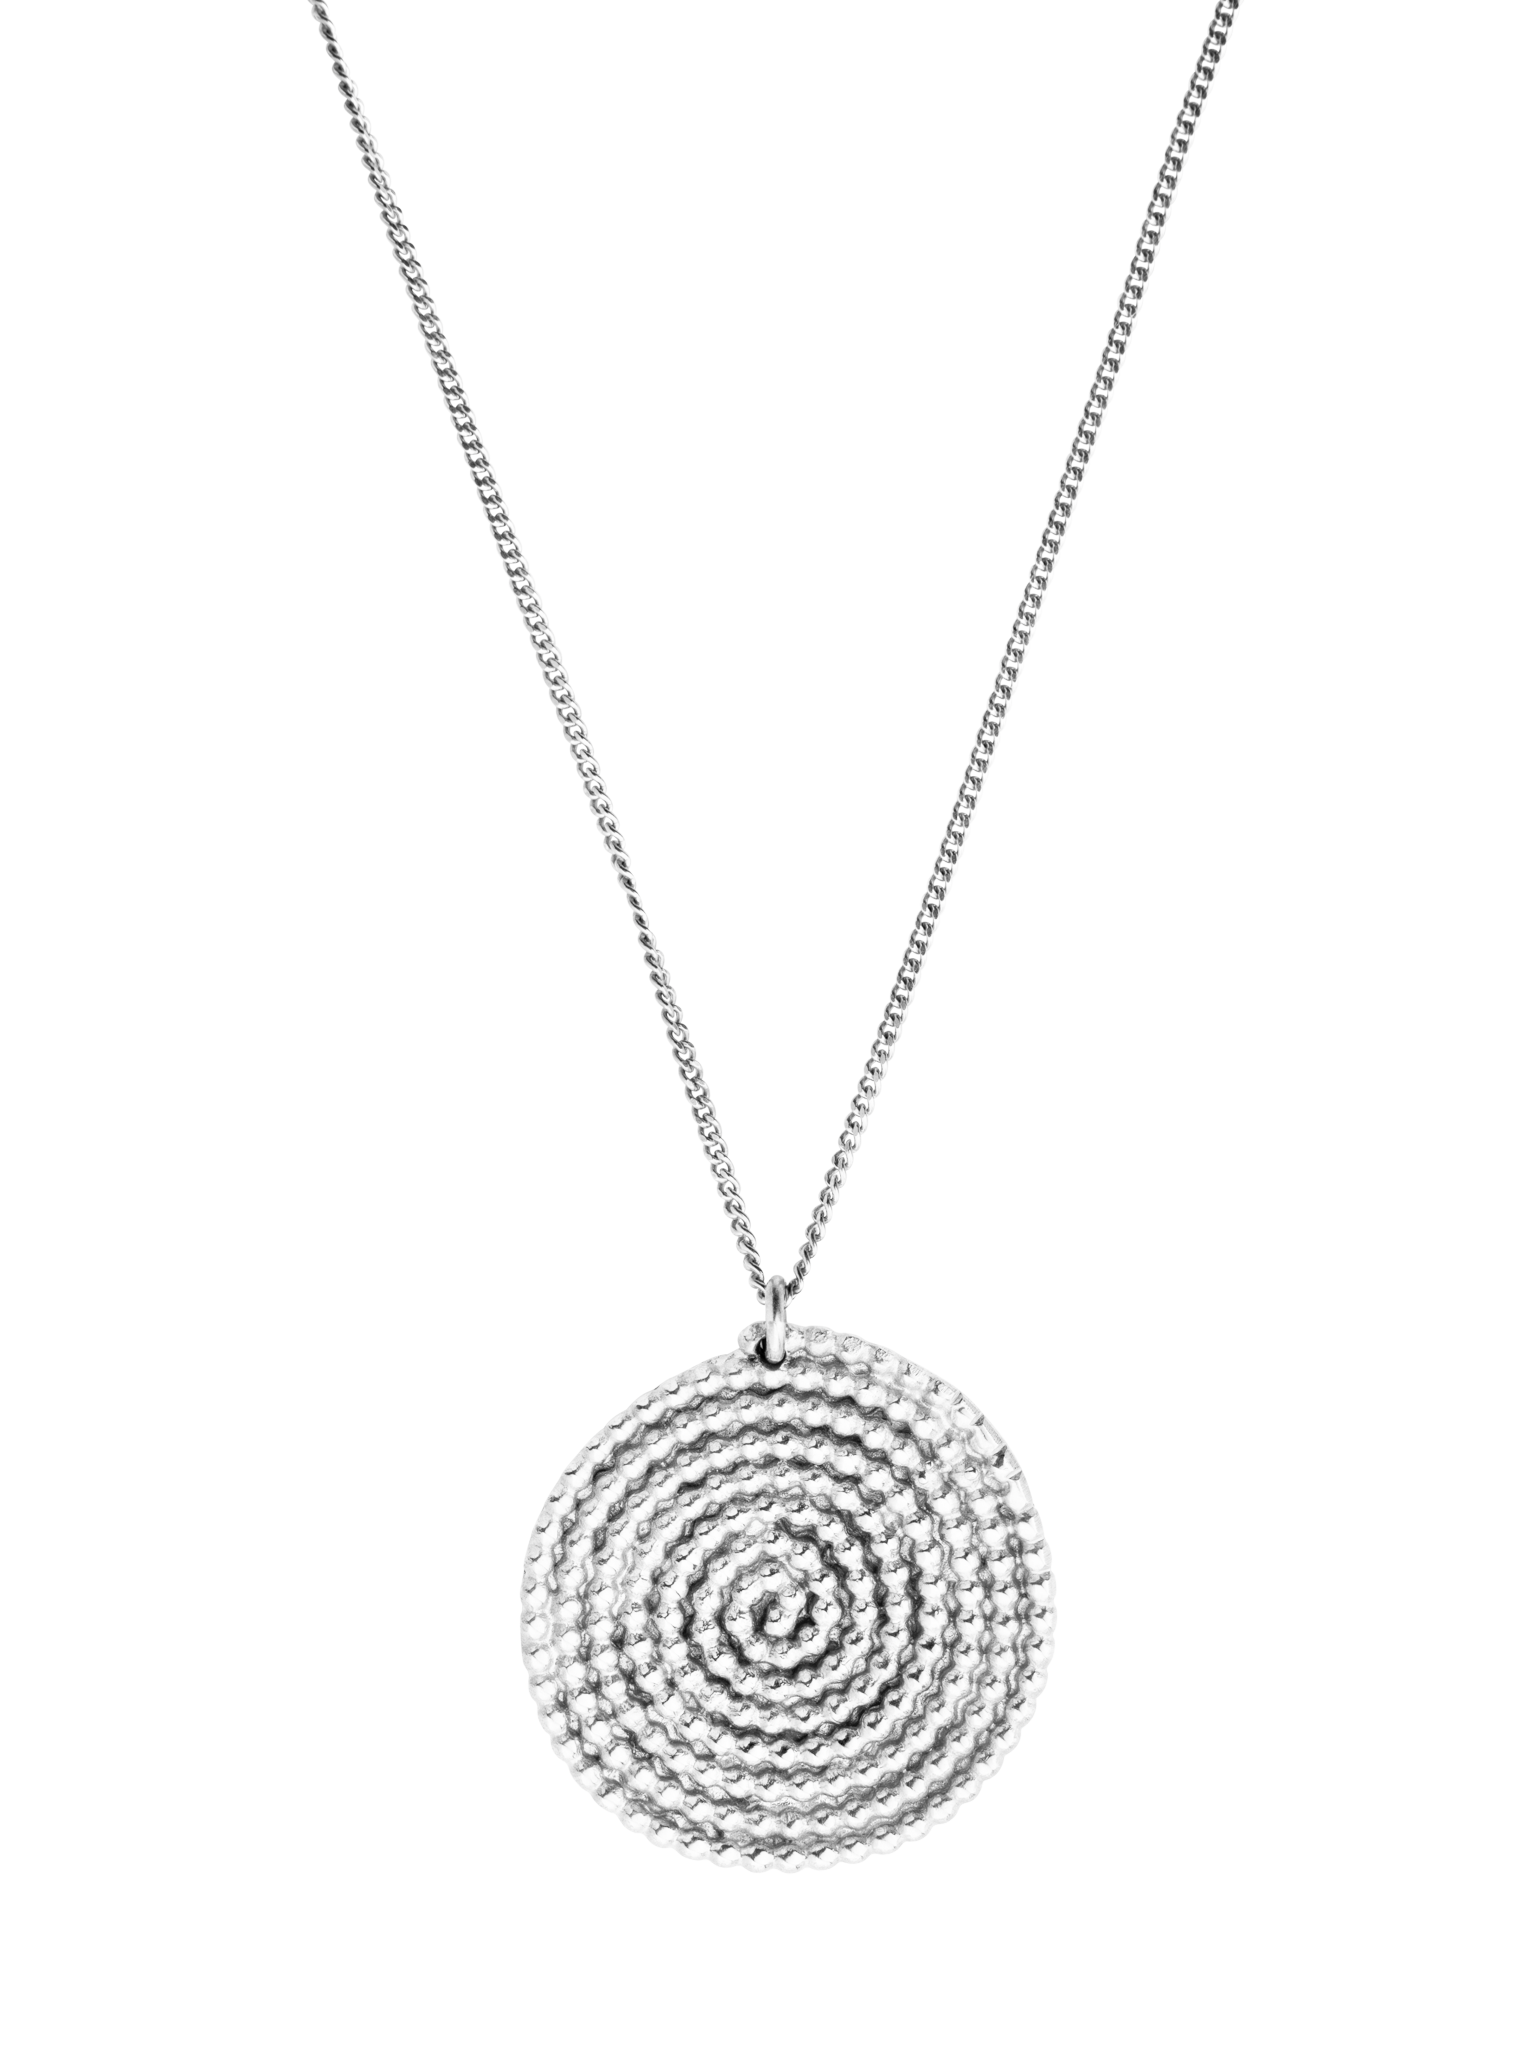 Granulated large spiral pendant necklace